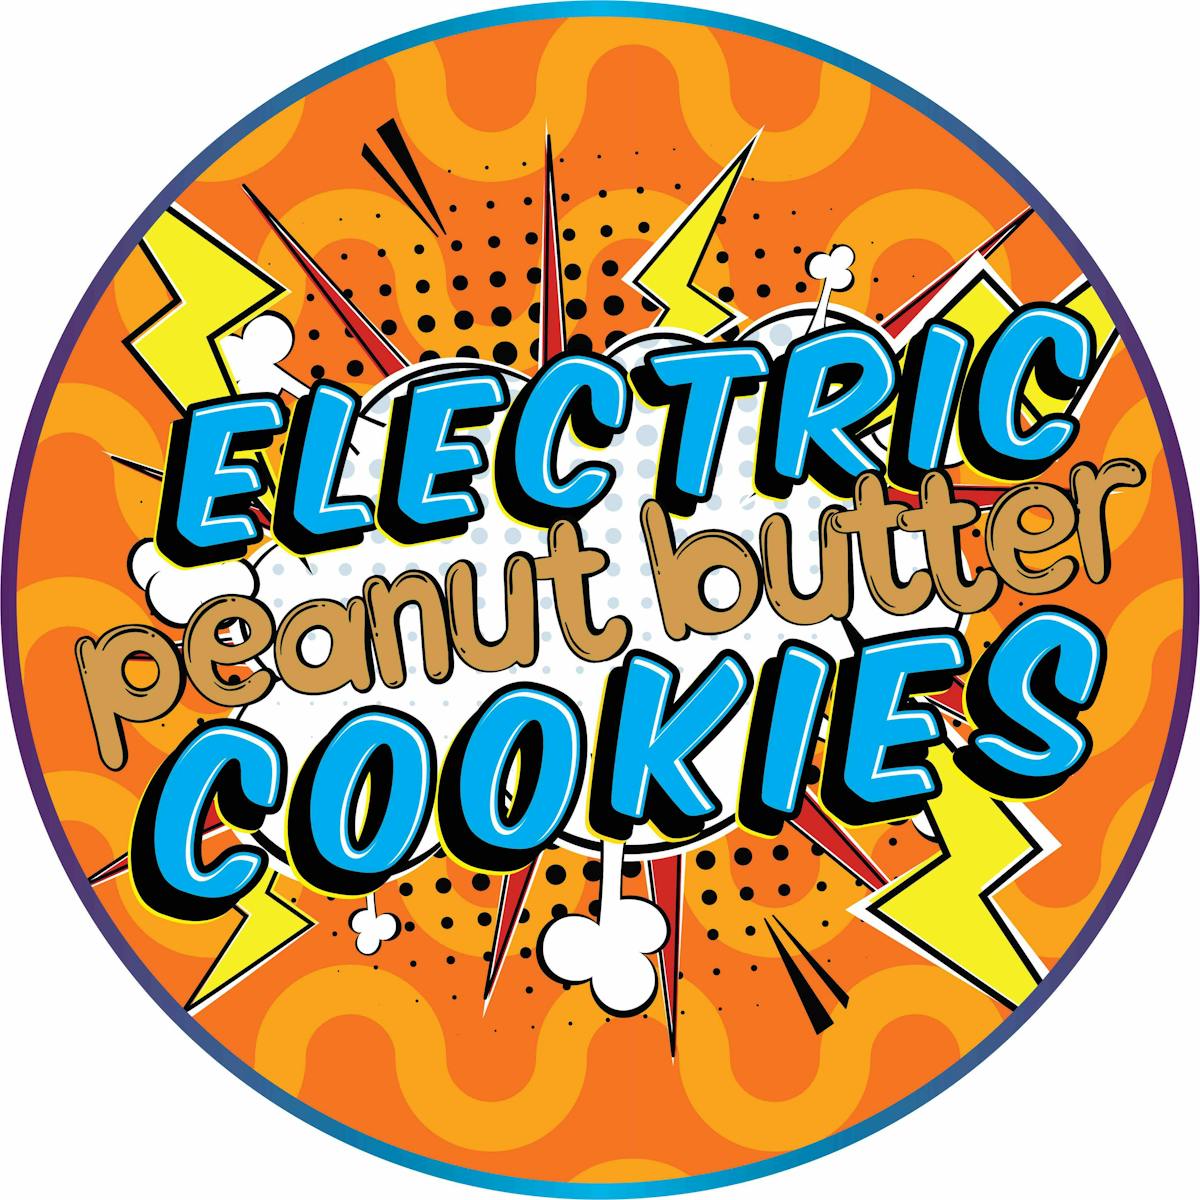 image of Electric Peanut Butter Cookies